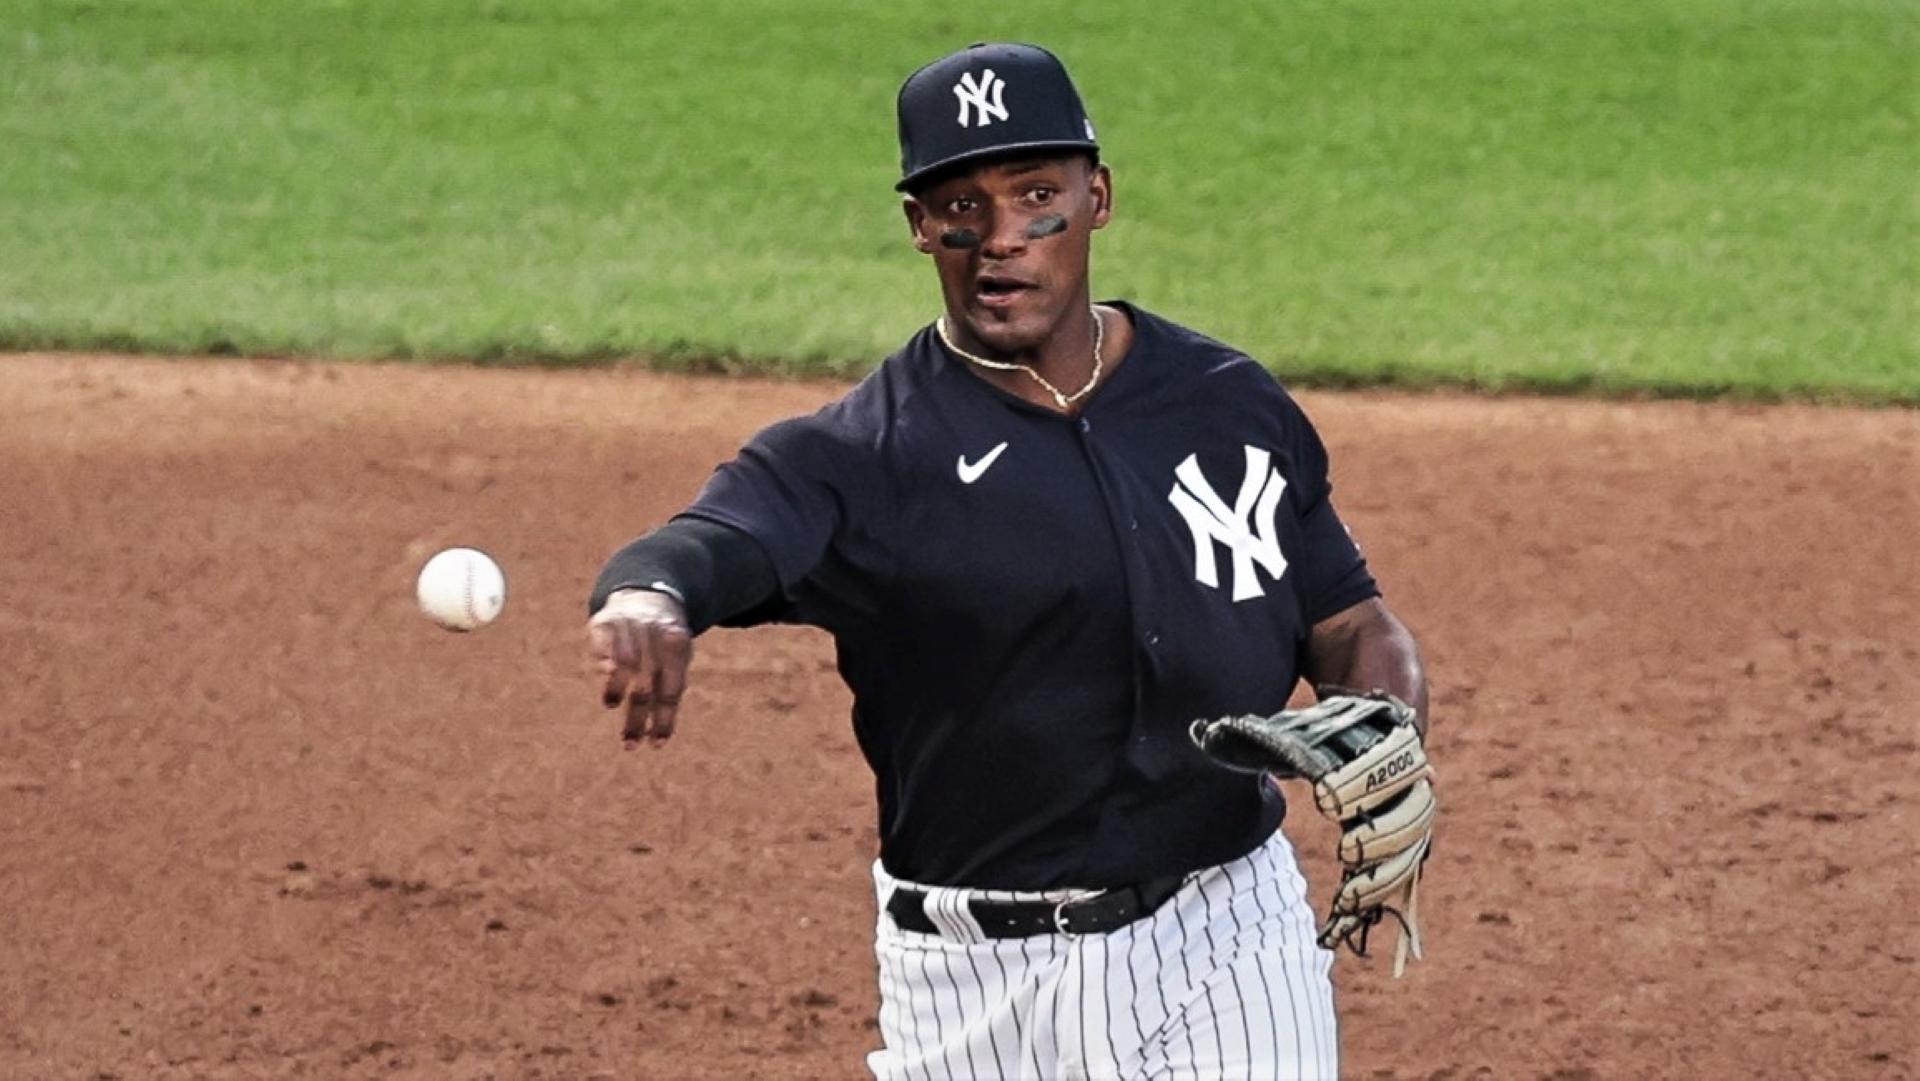 Miguel Andujar makes a throw to first base / USA TODAY